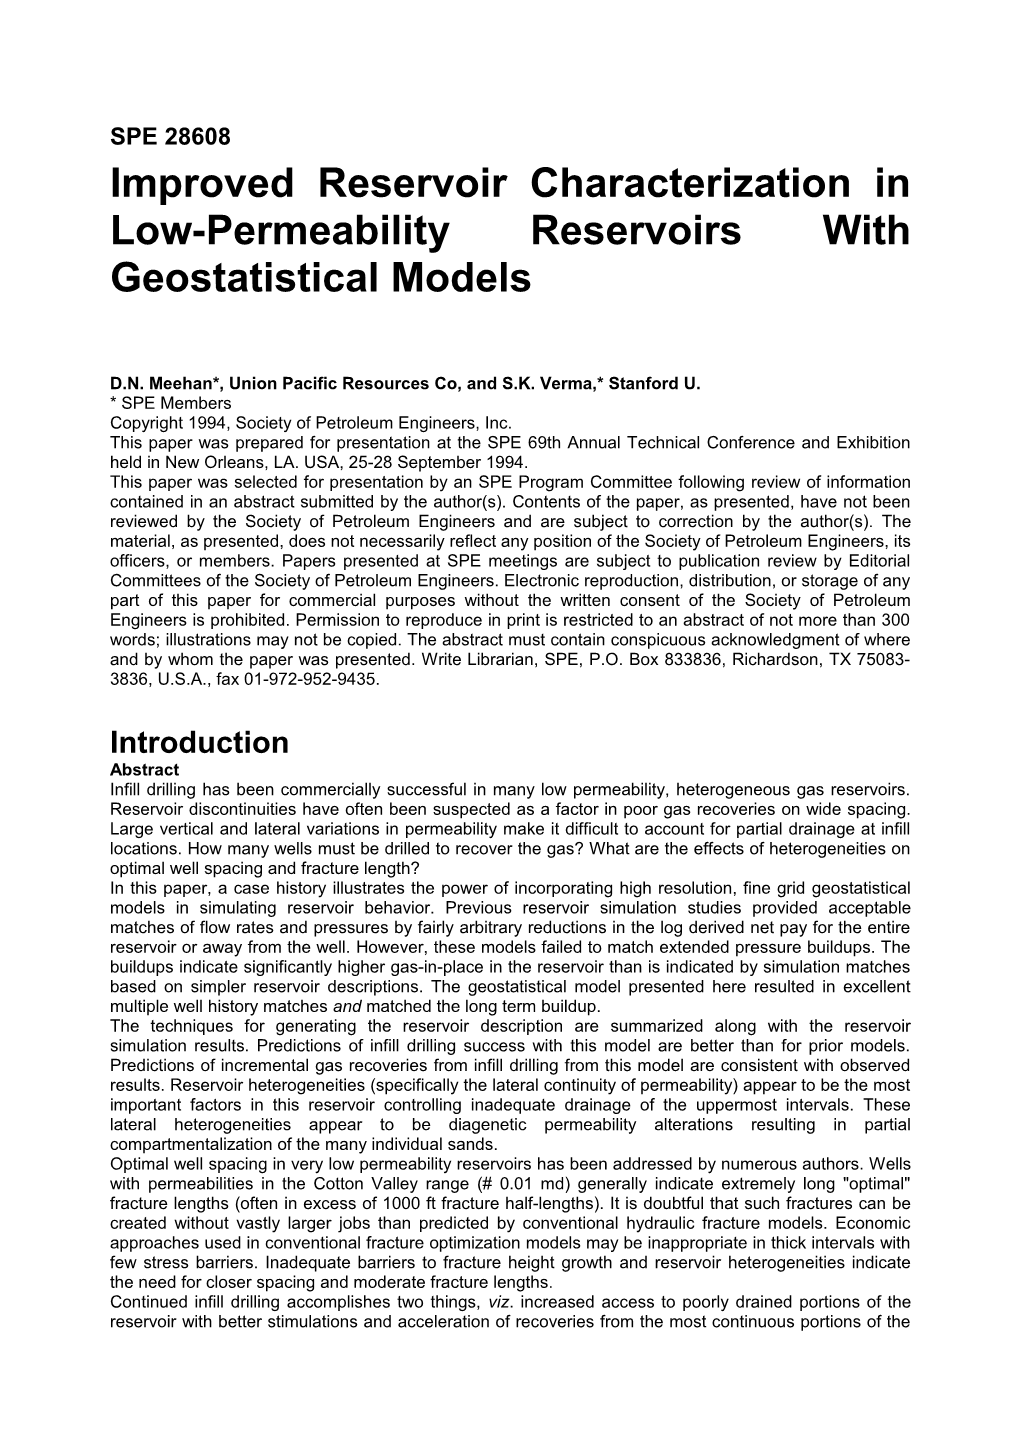 Improved Reservoir Characterization in Low-Permeability Reservoirs with Geostatistical Models